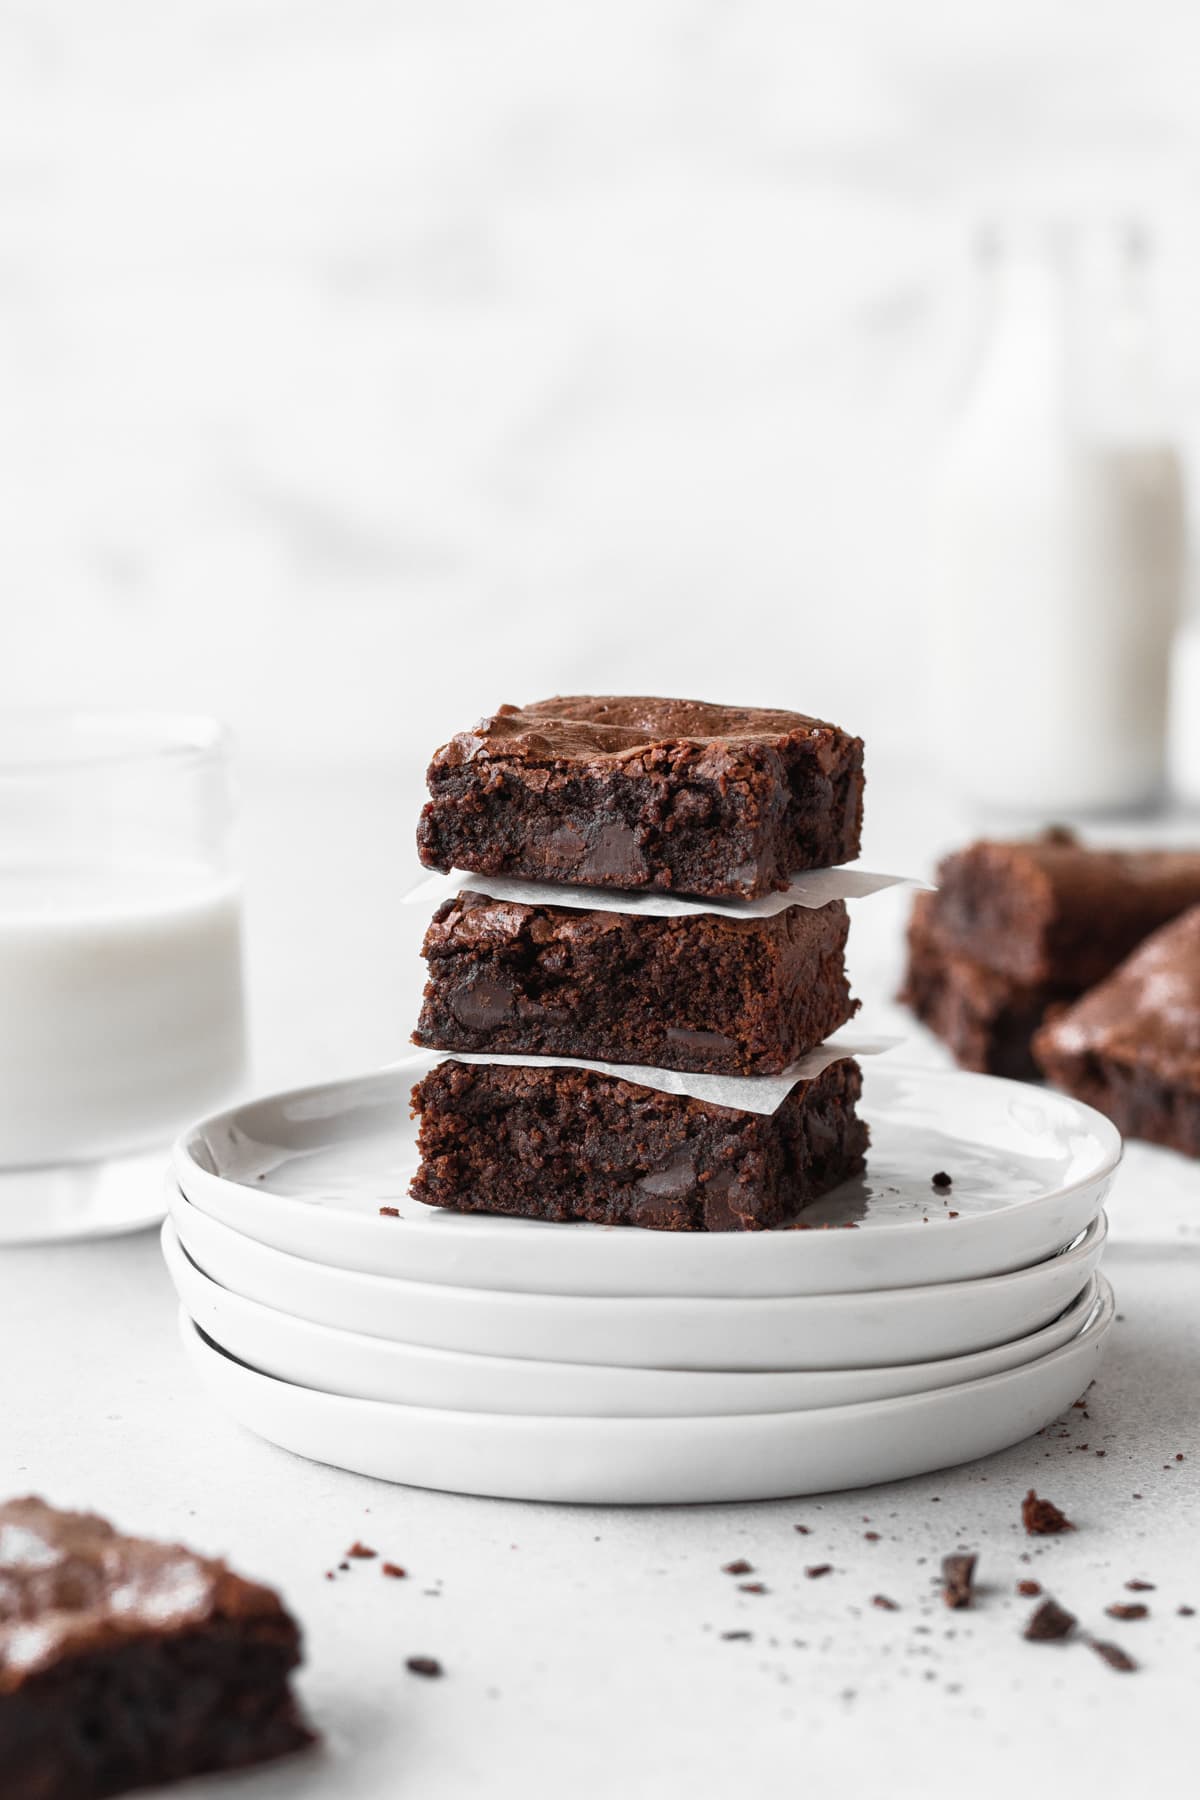 3 gluten-free chocolate brownies stacked on a stack of round white plates with more brownies and a jug of milk in the background.